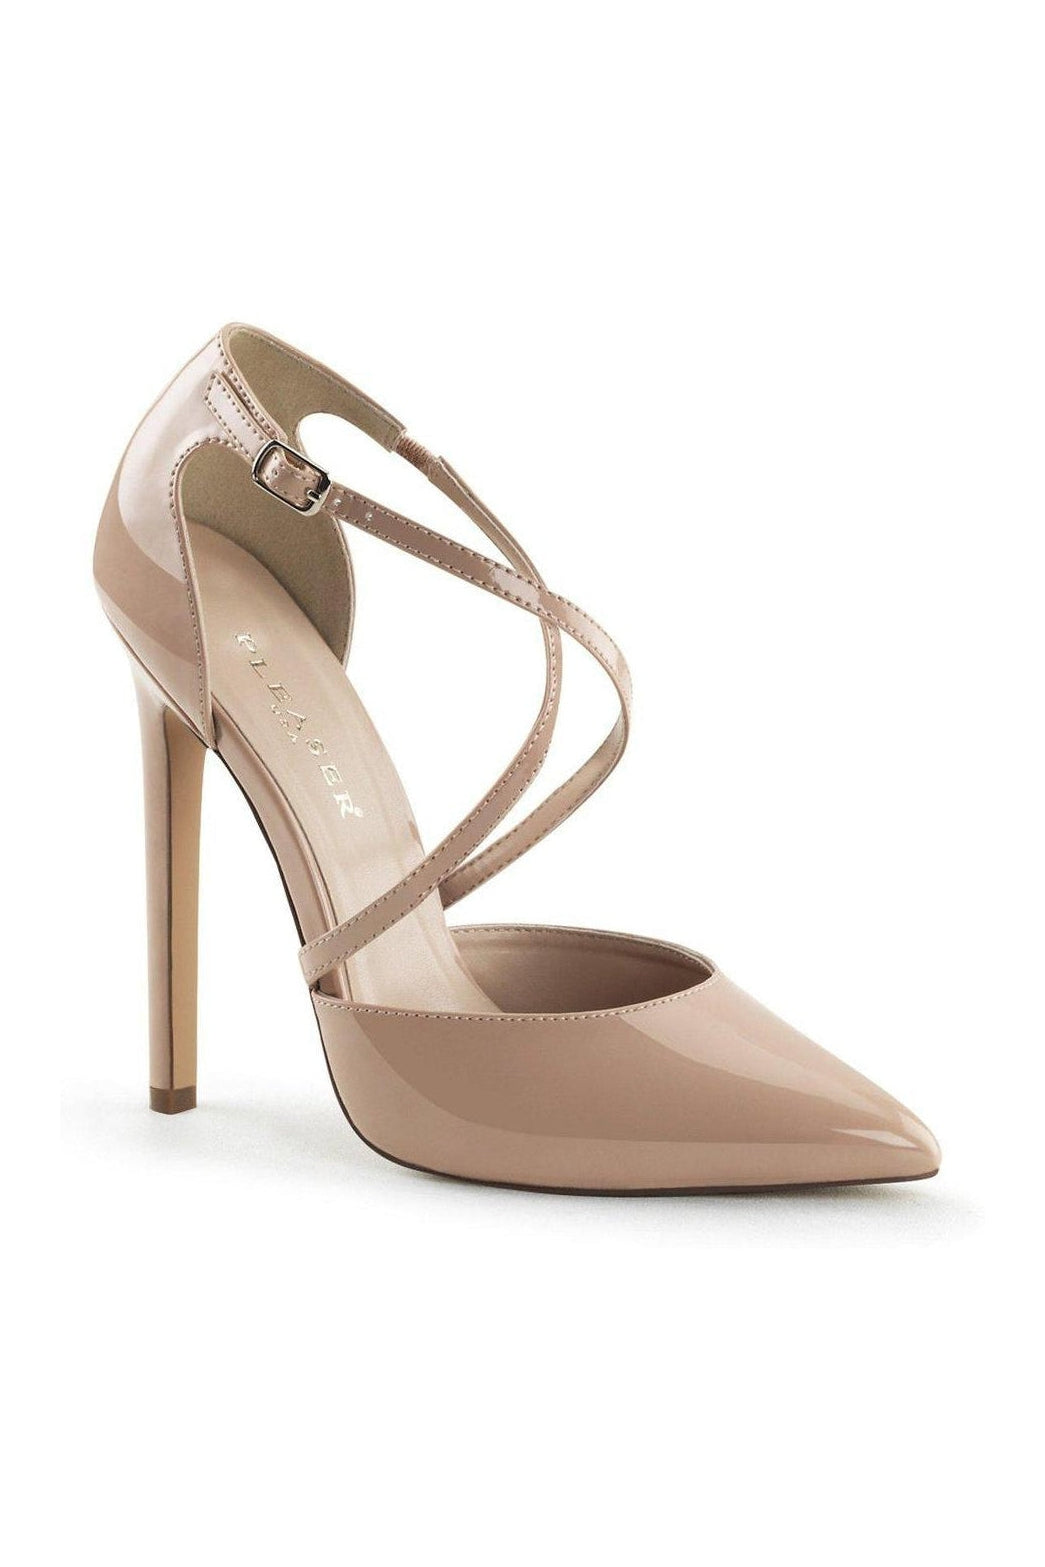 SEXY-26 Nude Patent Pump-Pumps-Pleaser-Nude-5-Patent-SEXYSHOES.COM